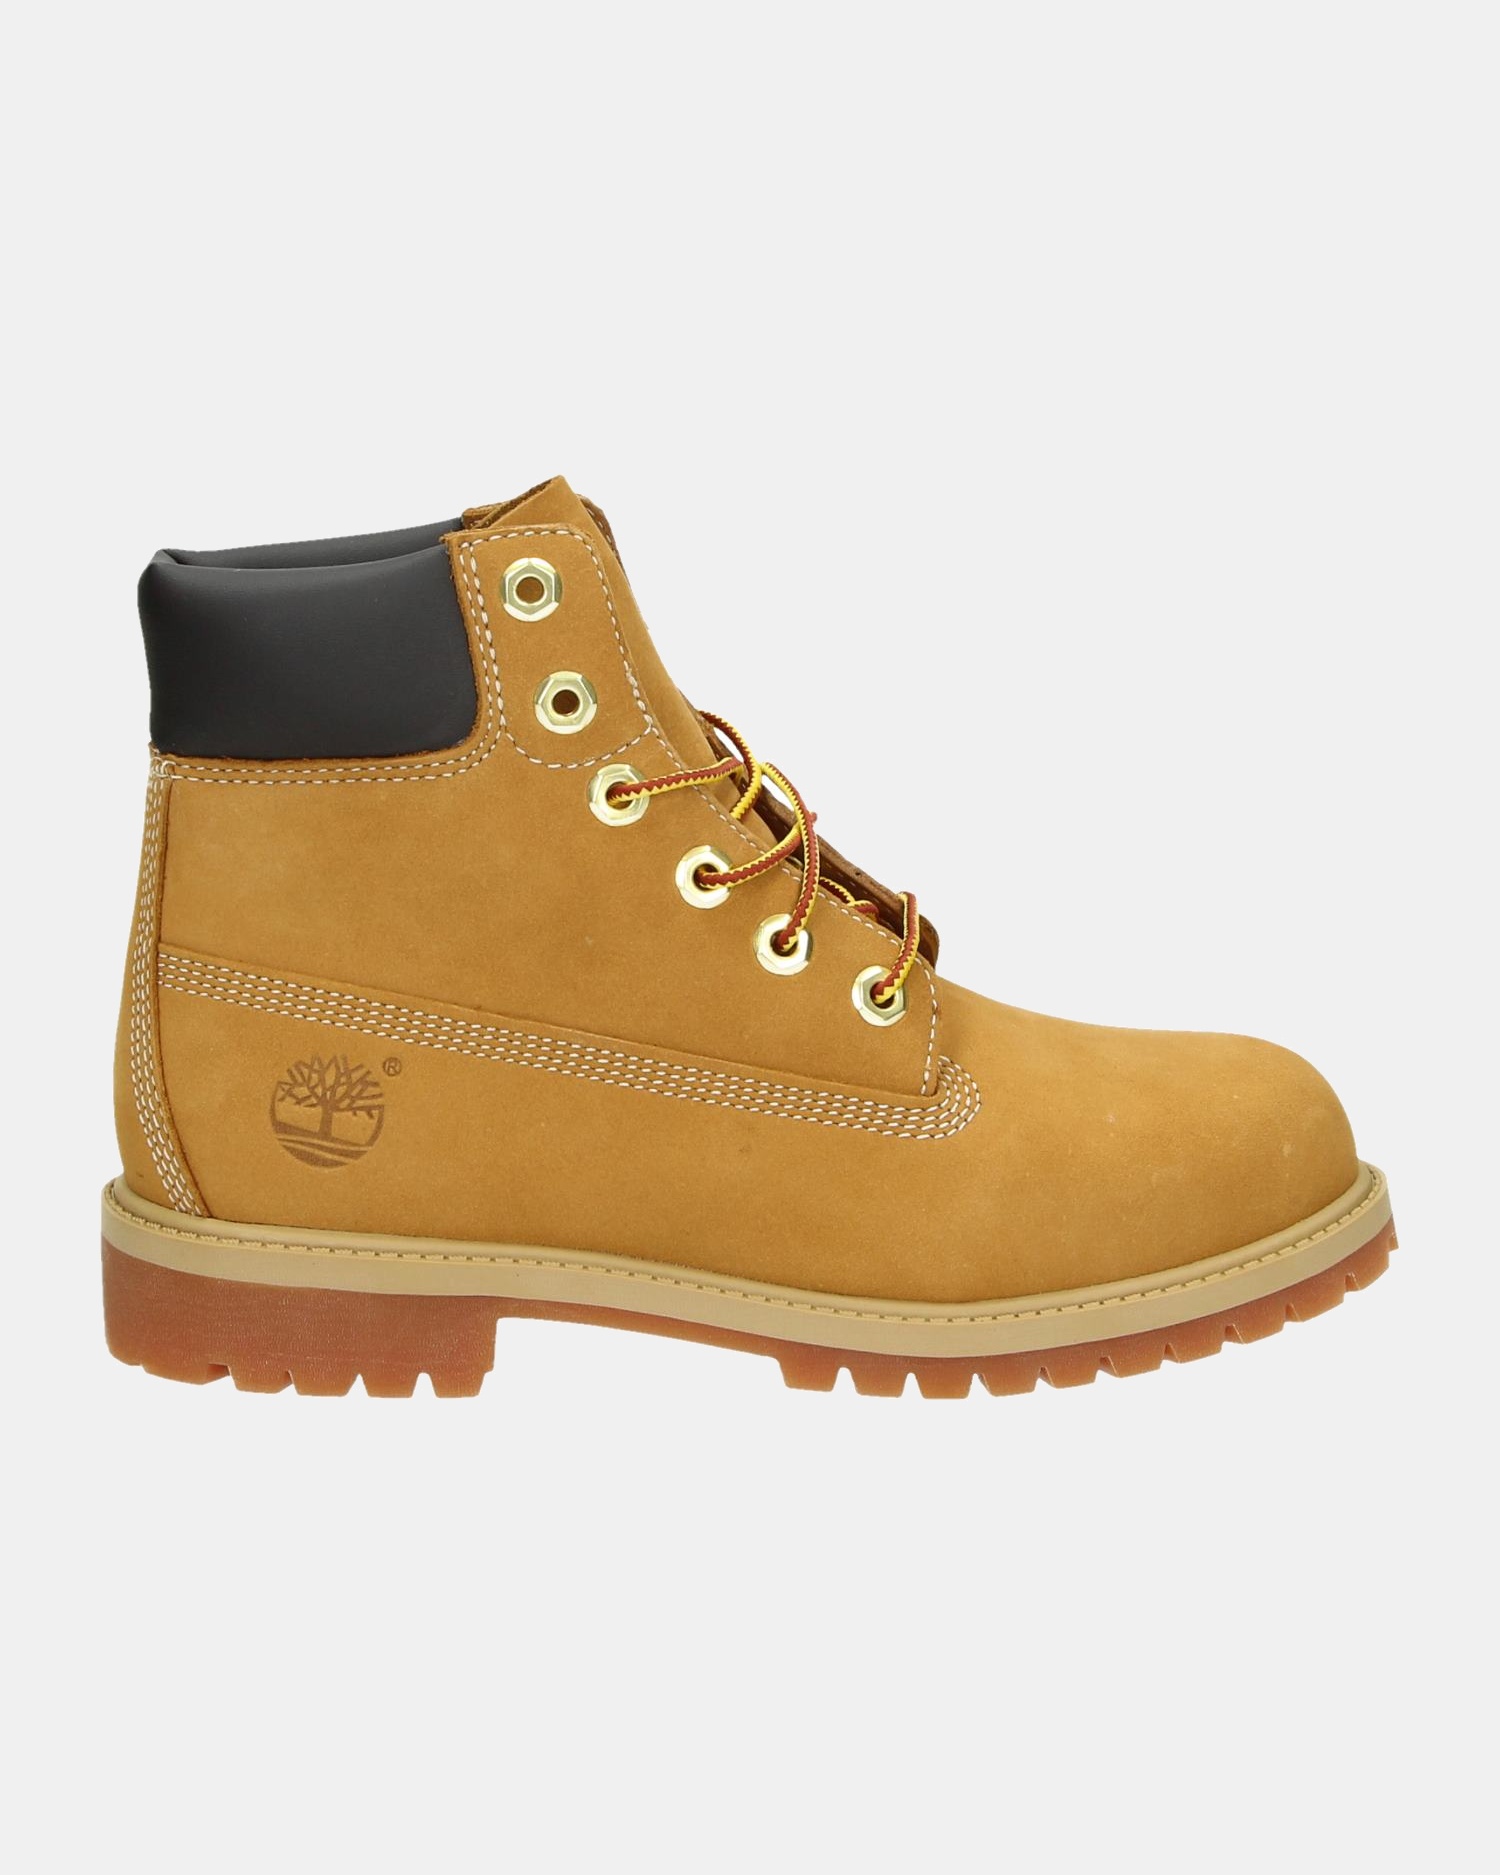 Timberland Courma Kid - Veterboots - Geel Nelson.nl